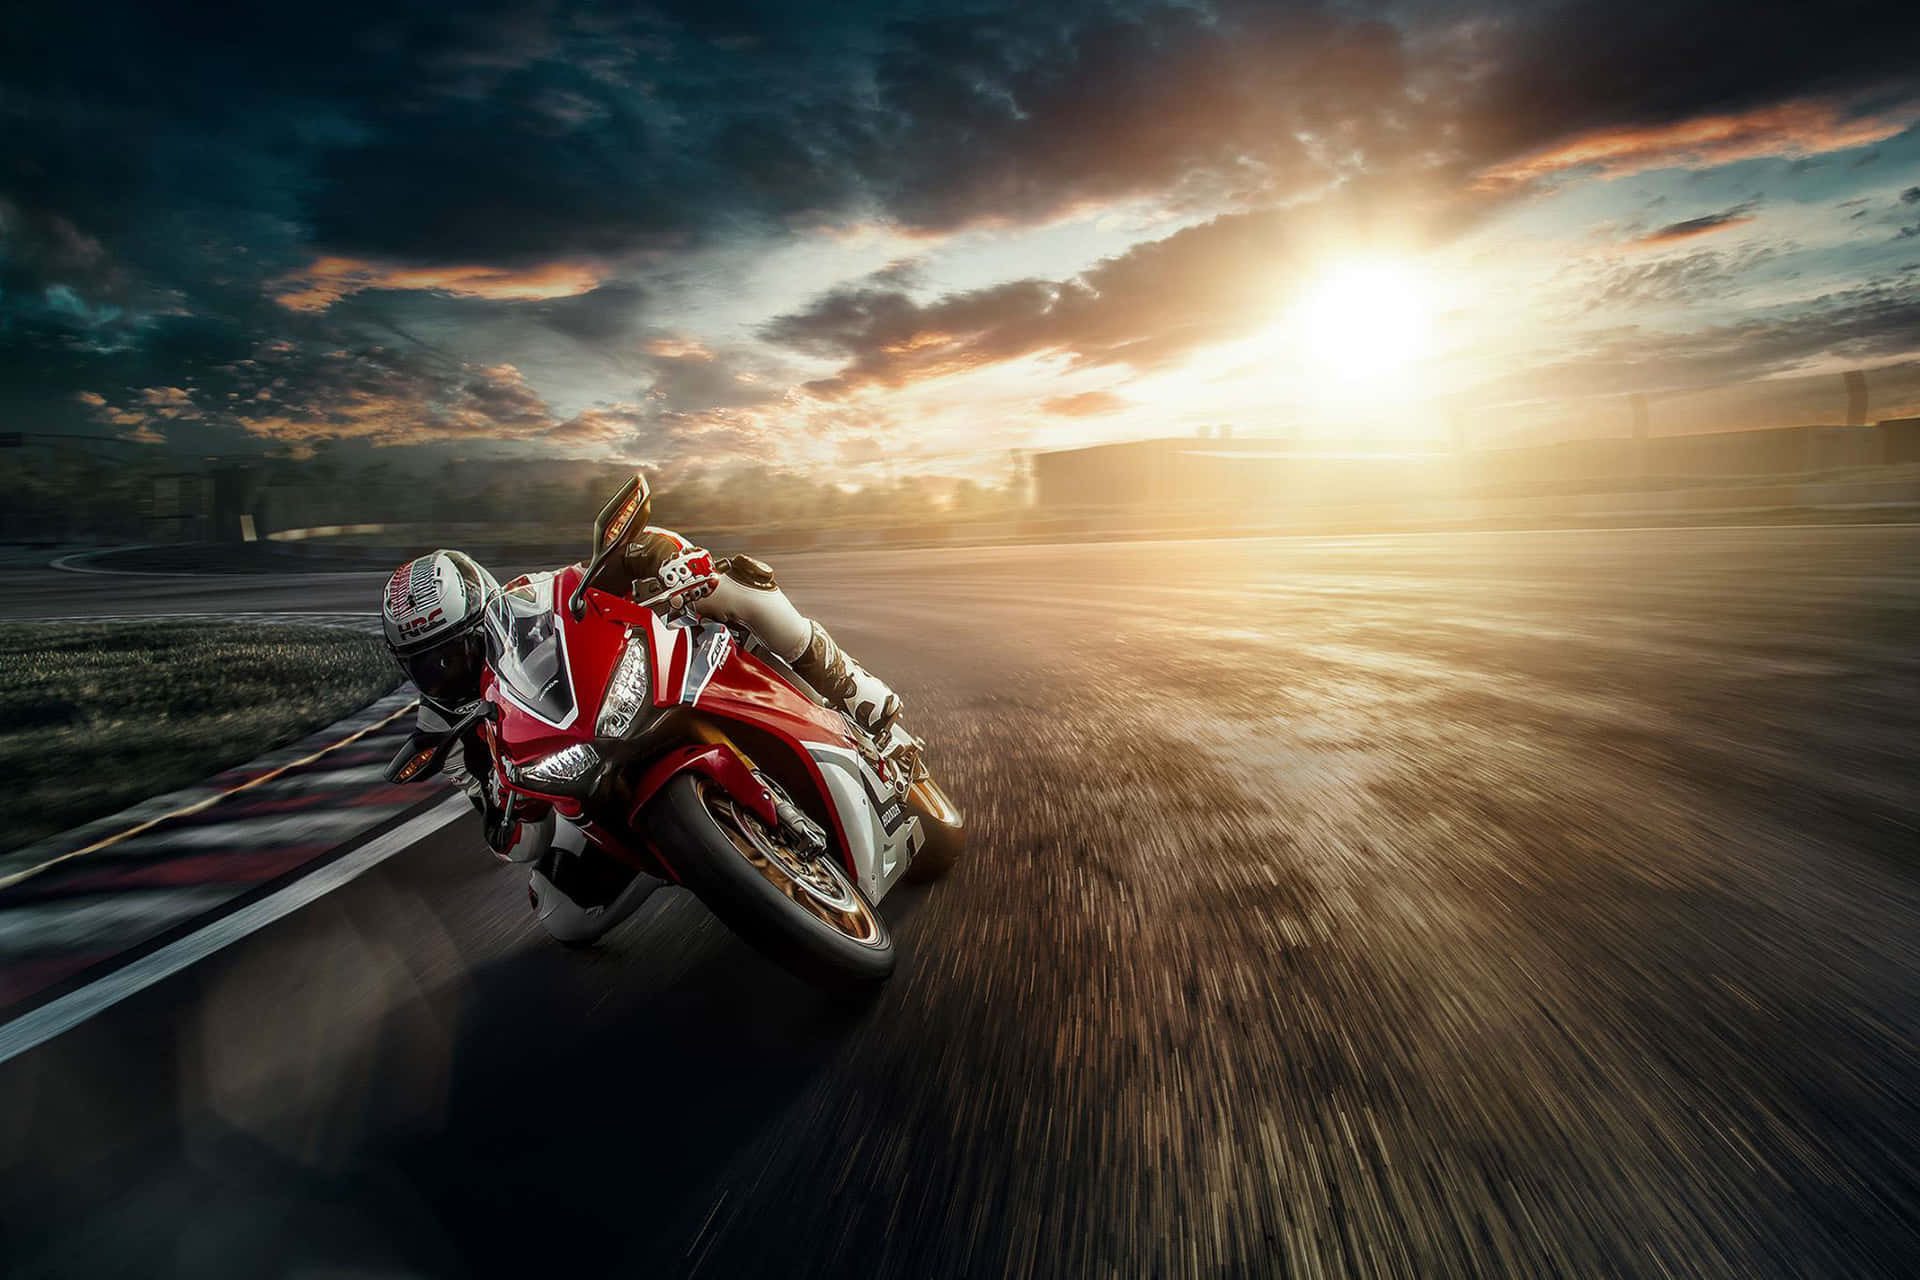 Majestic Honda Motorcycle Against A Scenic Landscape Wallpaper